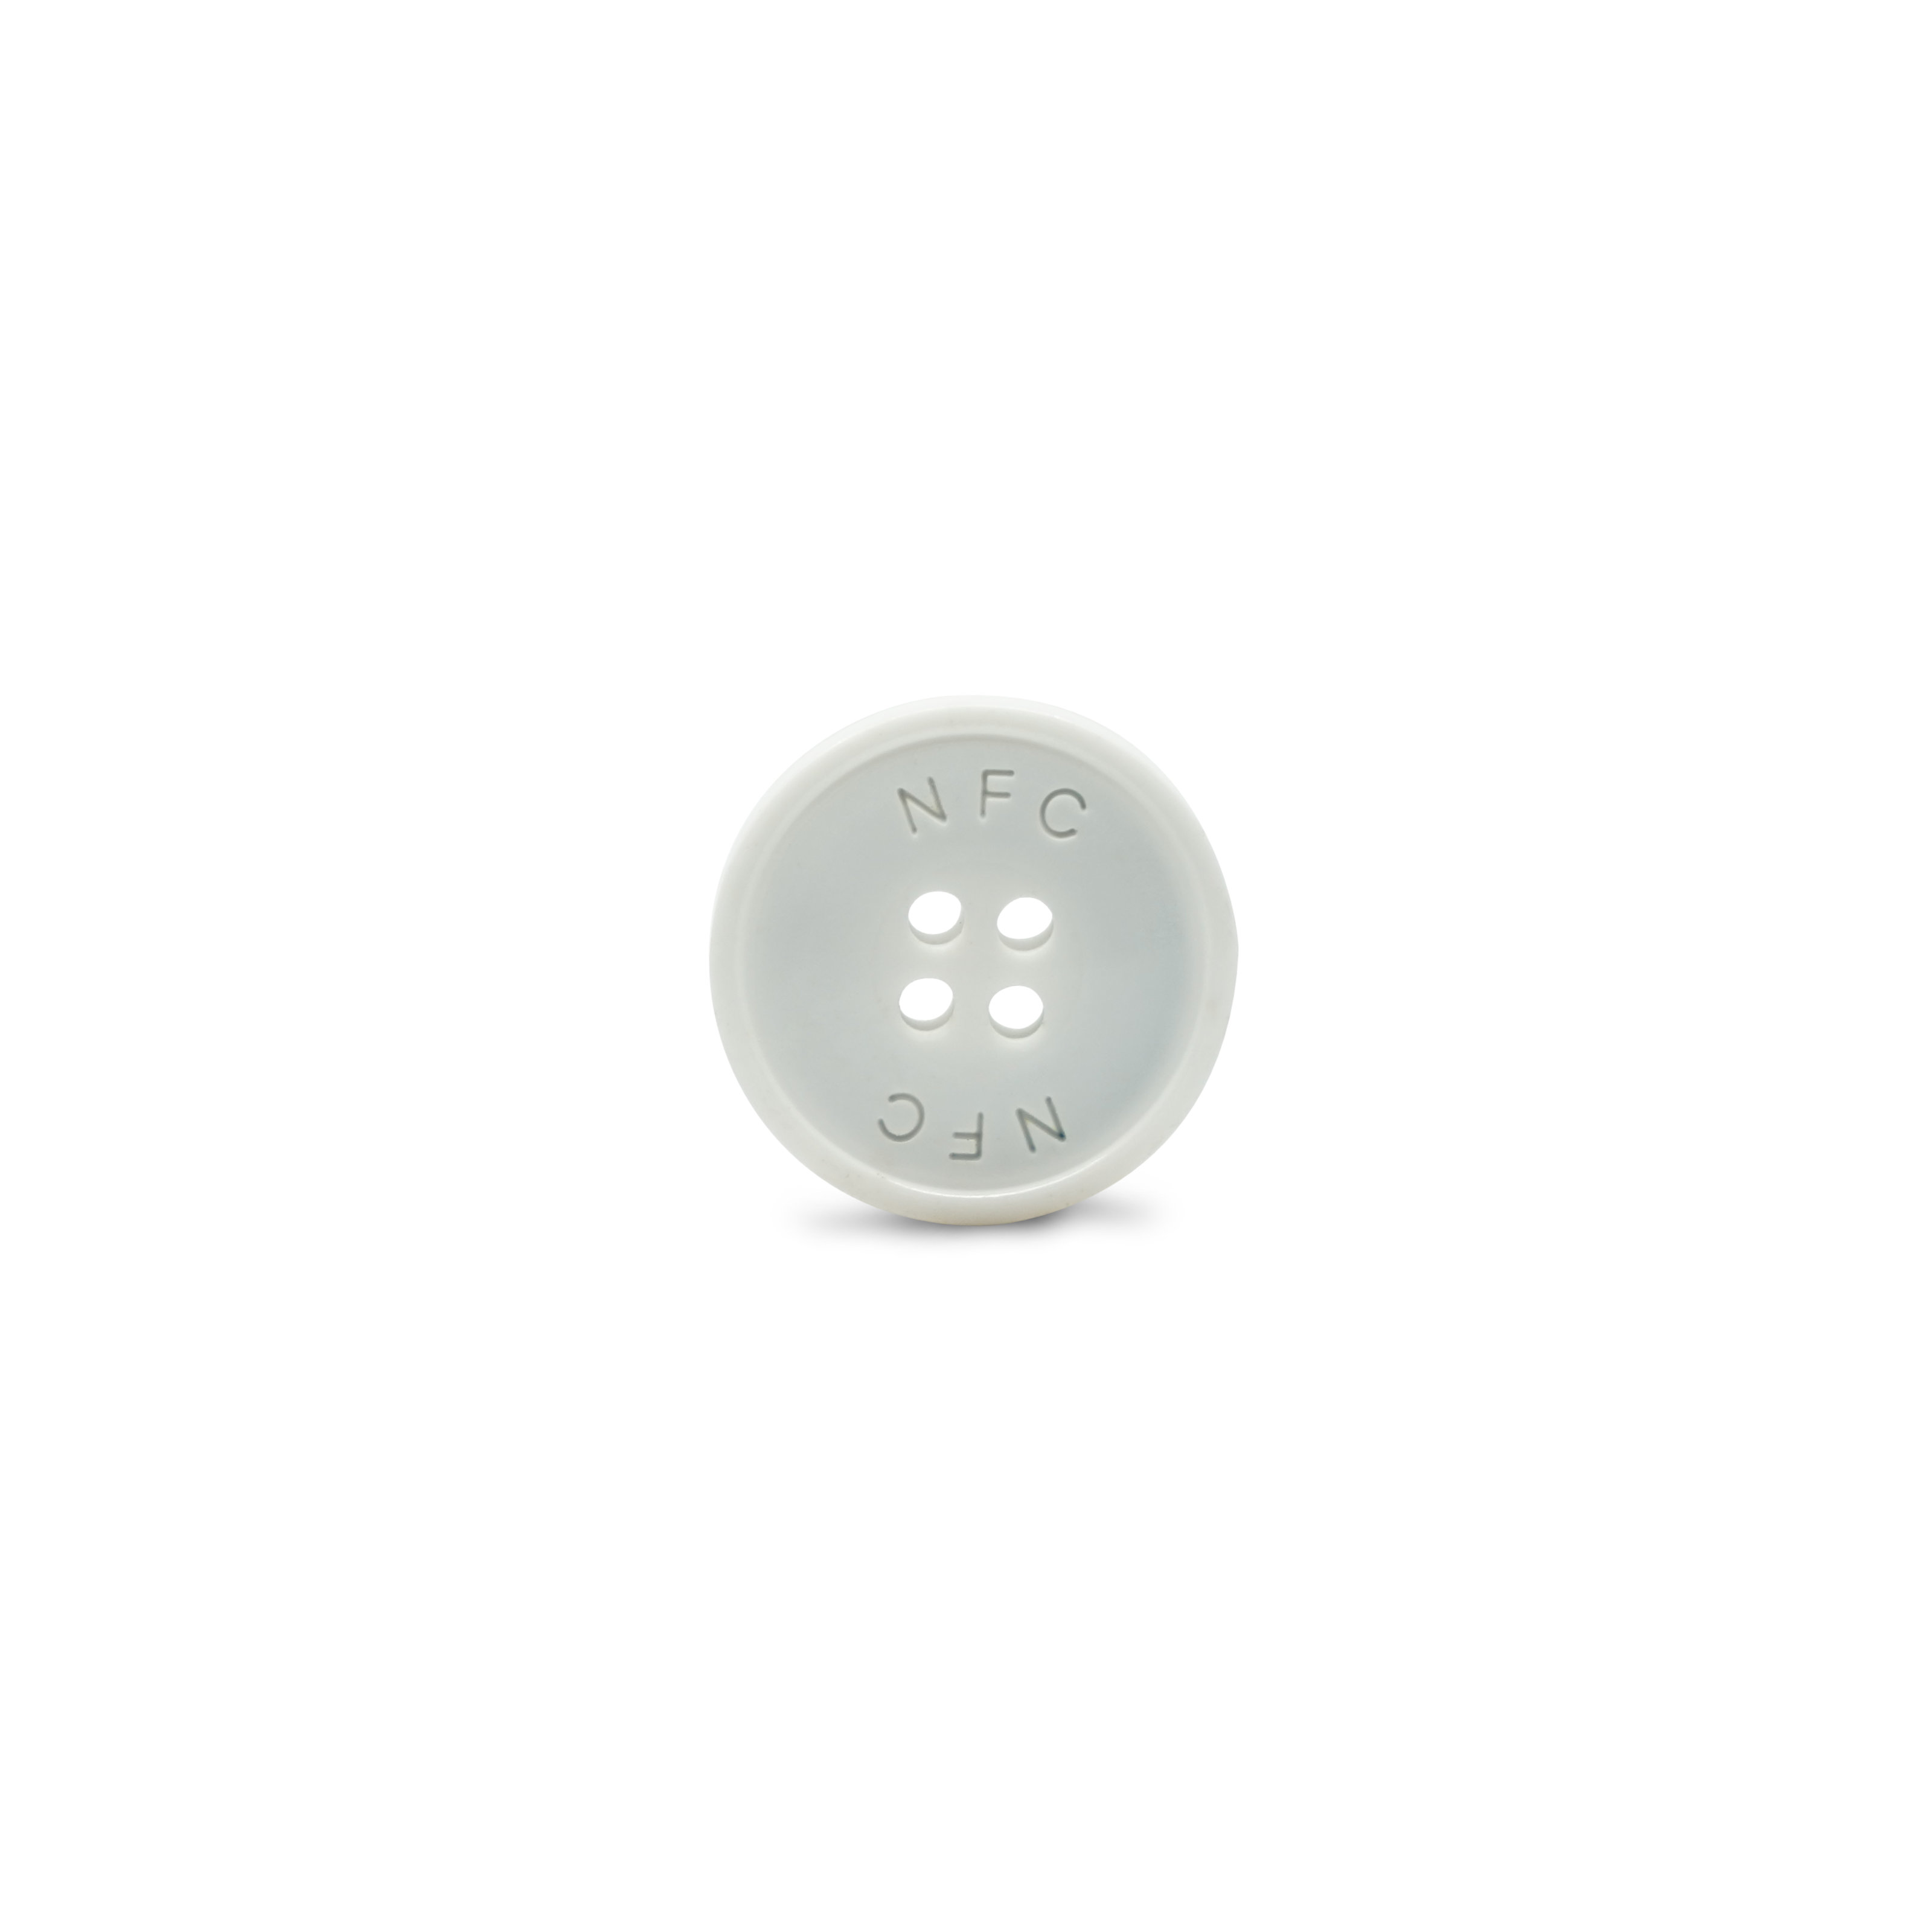 NFC button resin - 22 mm - NTAG215 - 540 byte - white